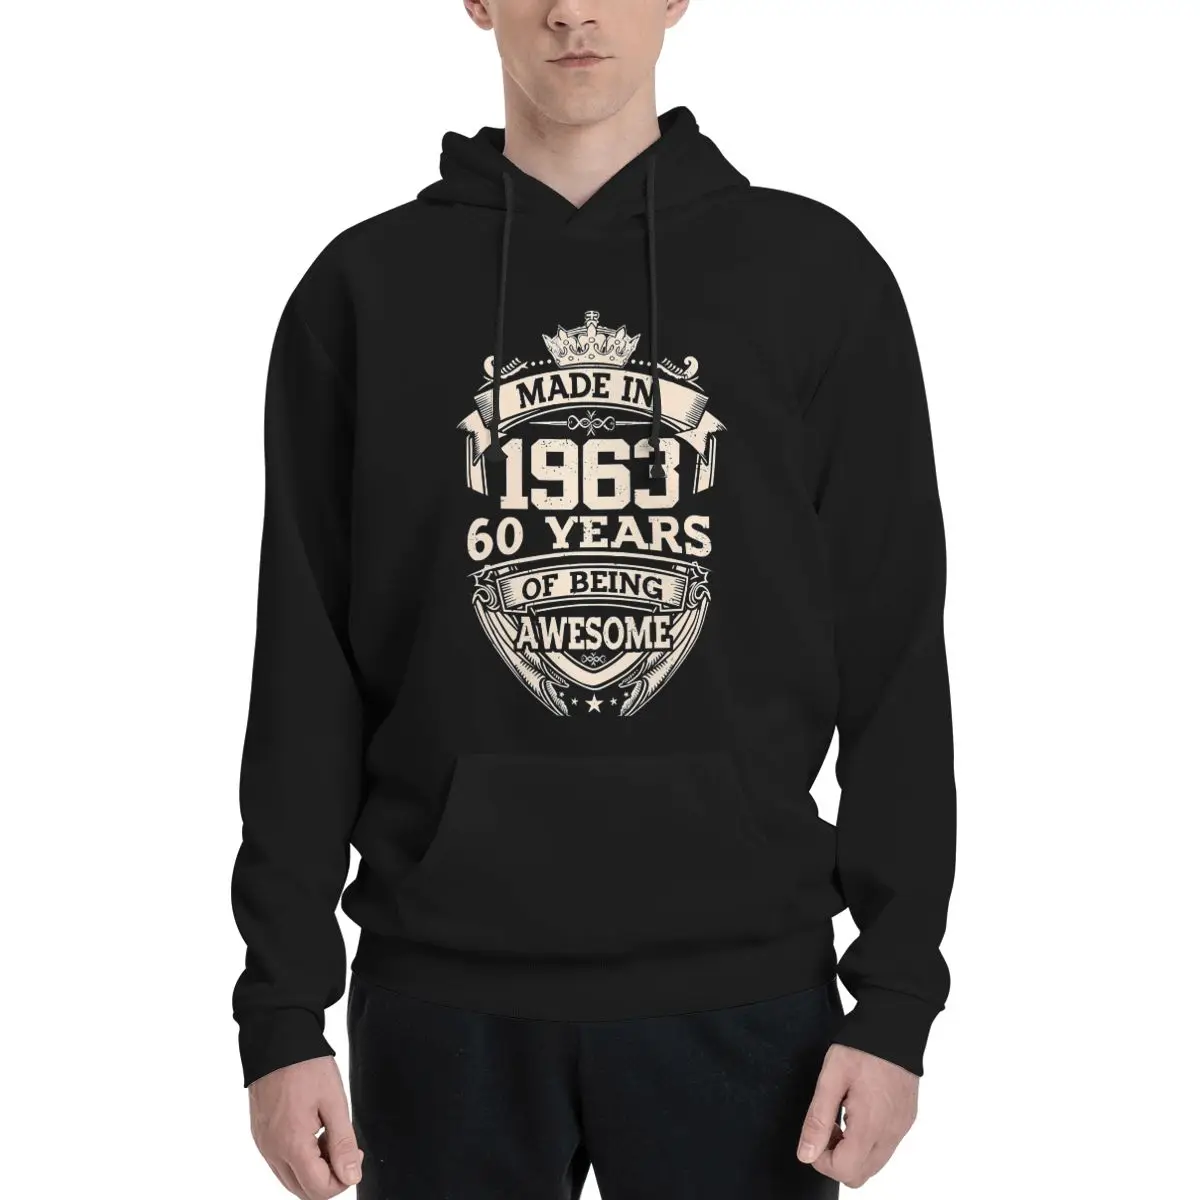 

Vintage Made In 1963 60 Years Of Being Awesome Birthday Polyester Hoodie Men's sweatershirt Warm Dif Colors Sizes